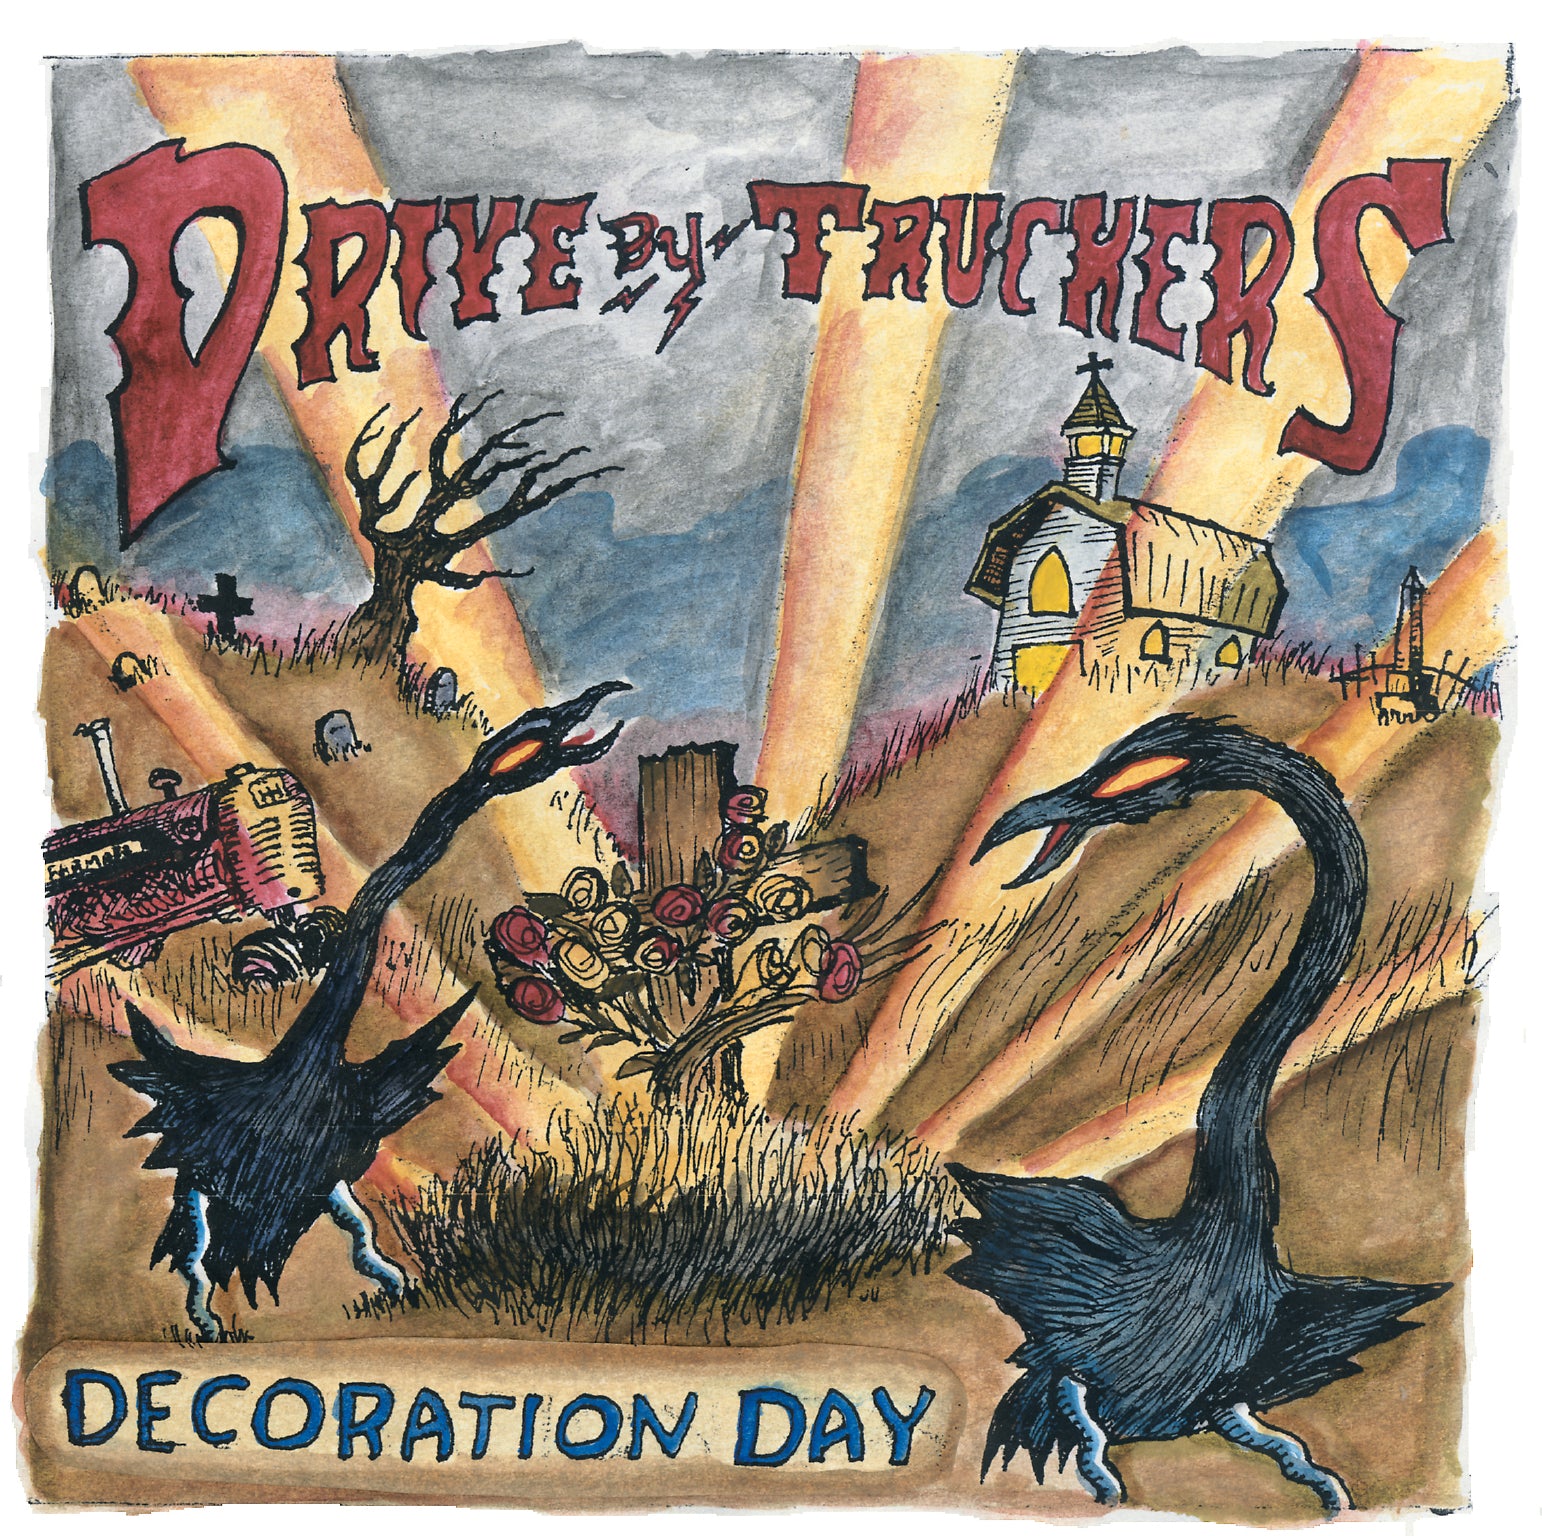 Drive-By Truckers - Decoration Day [Vinyl]